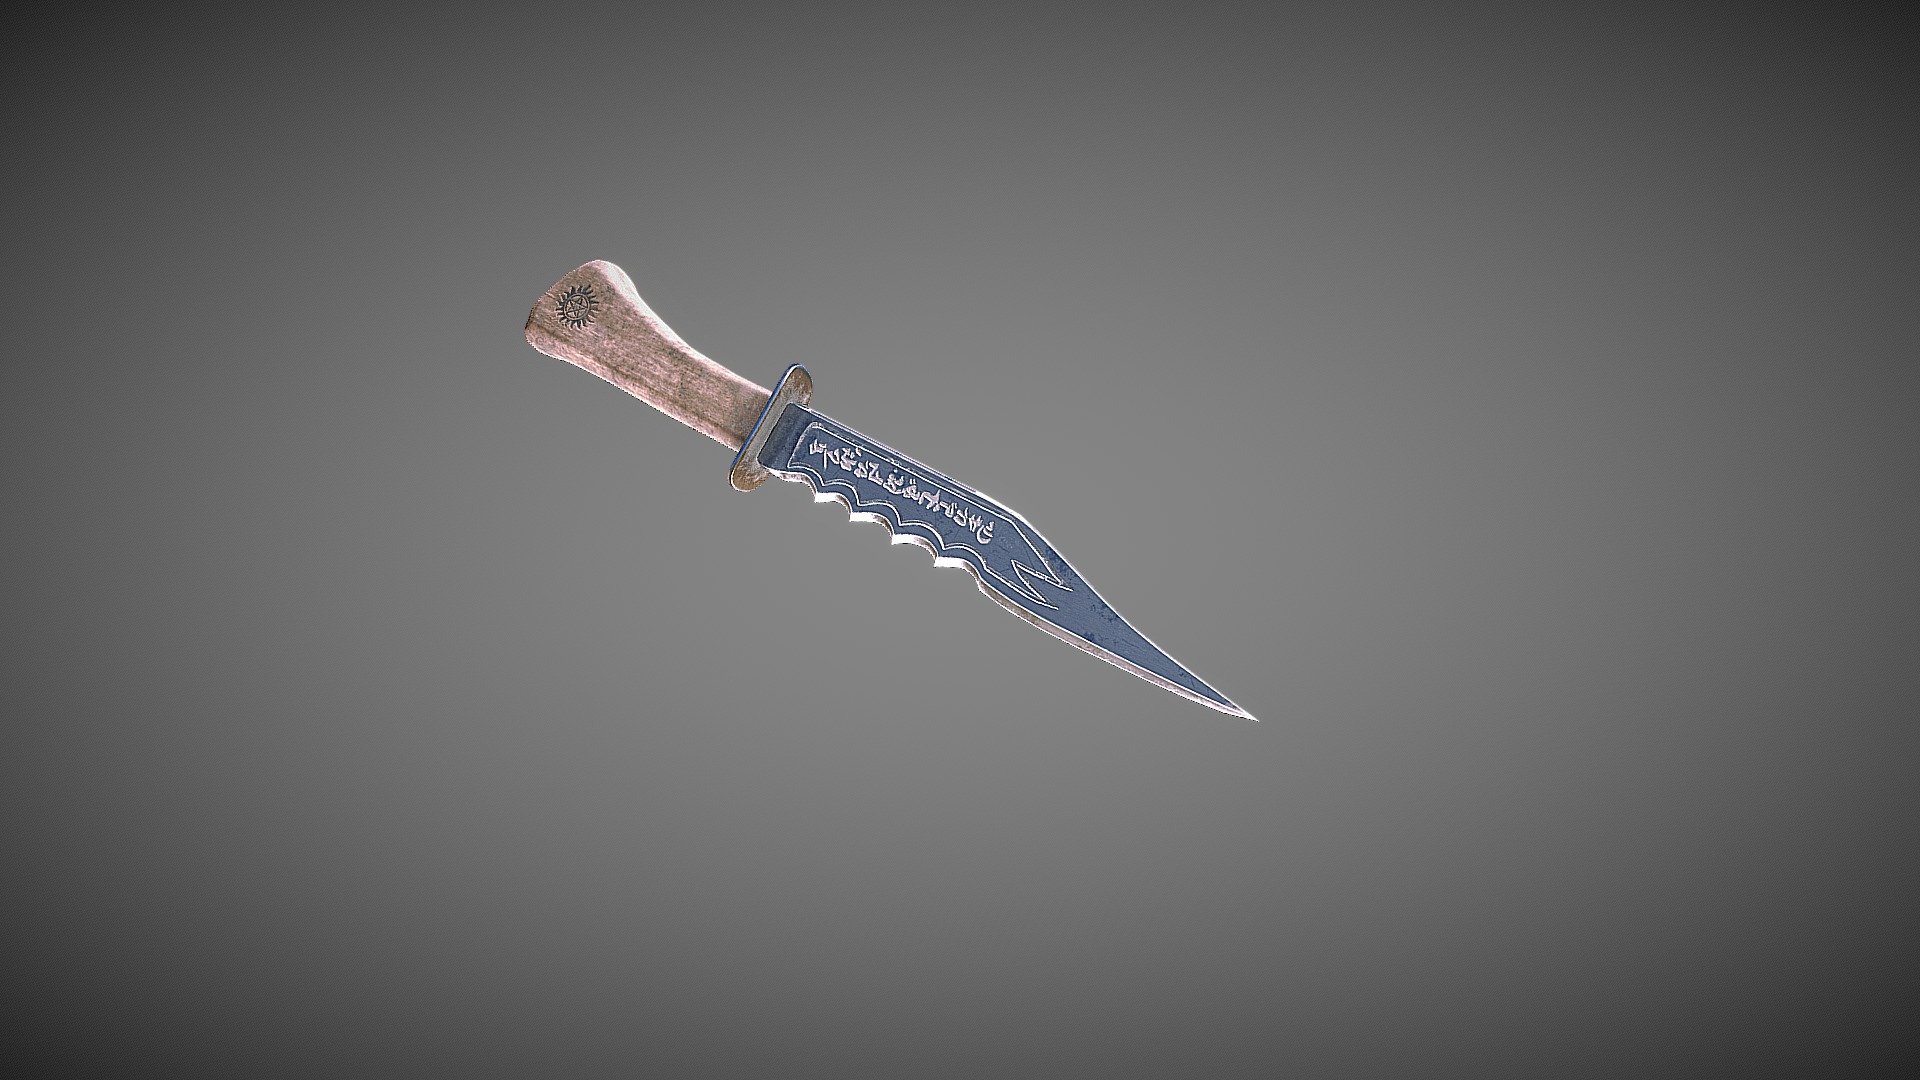 The final product with all textures applied. I'm not super happy with how it turned out, but it will do 3d model